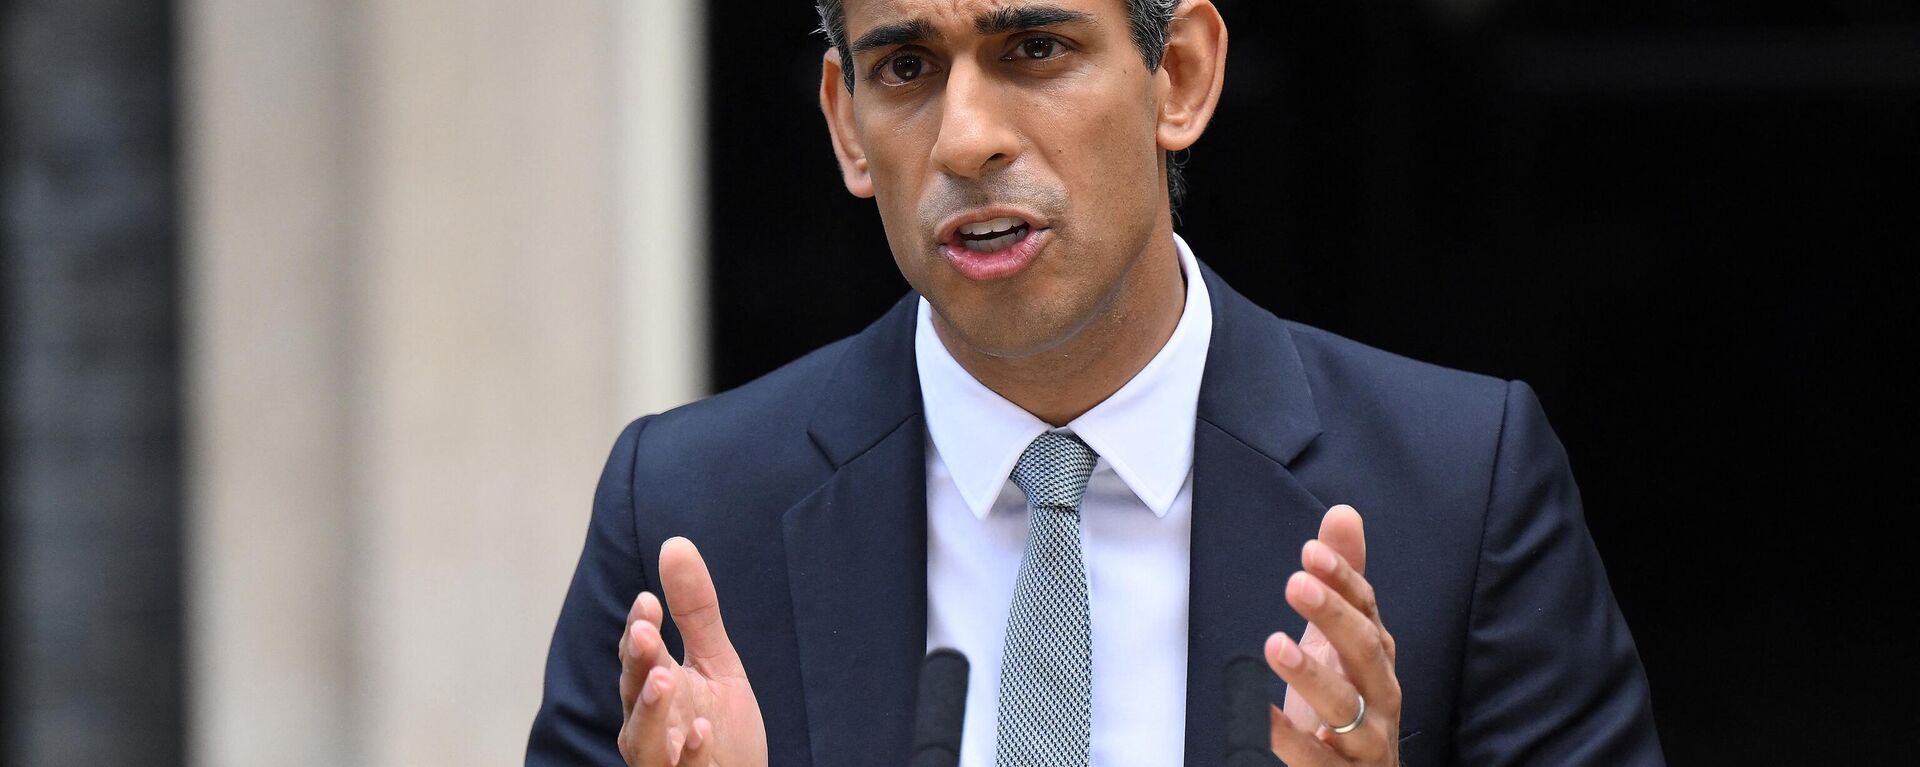 Britain's newly appointed Prime Minister Rishi Sunak delivers a speech outside 10 Downing Street in central London, on October 25, 2022. - Sputnik International, 1920, 26.10.2022